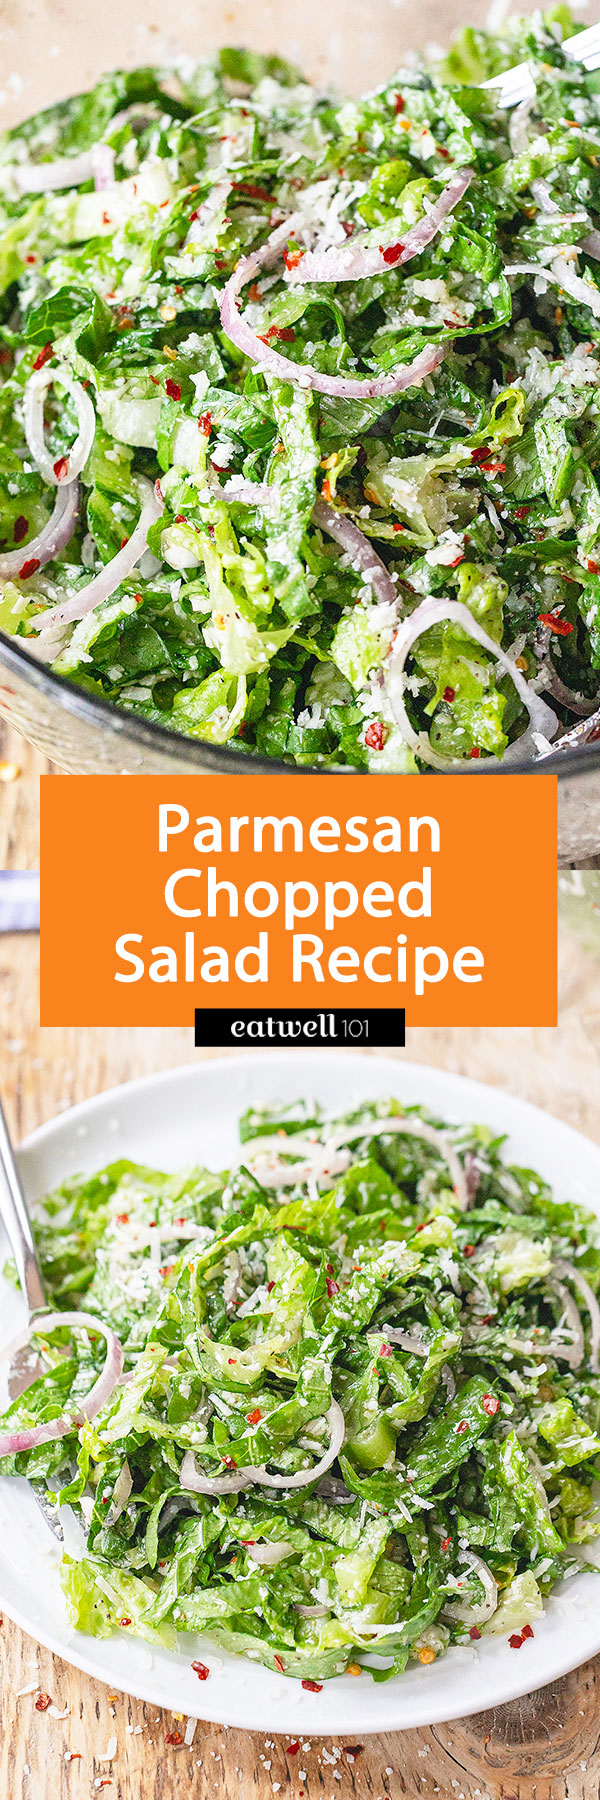 Parmesan Chopped Salad - #salad #recipe #eatwell101 - Parmesan chopped salad is fresh and light, perfect for a light lunch or as a side dish. Enjoy this parmesan salad recipe today!